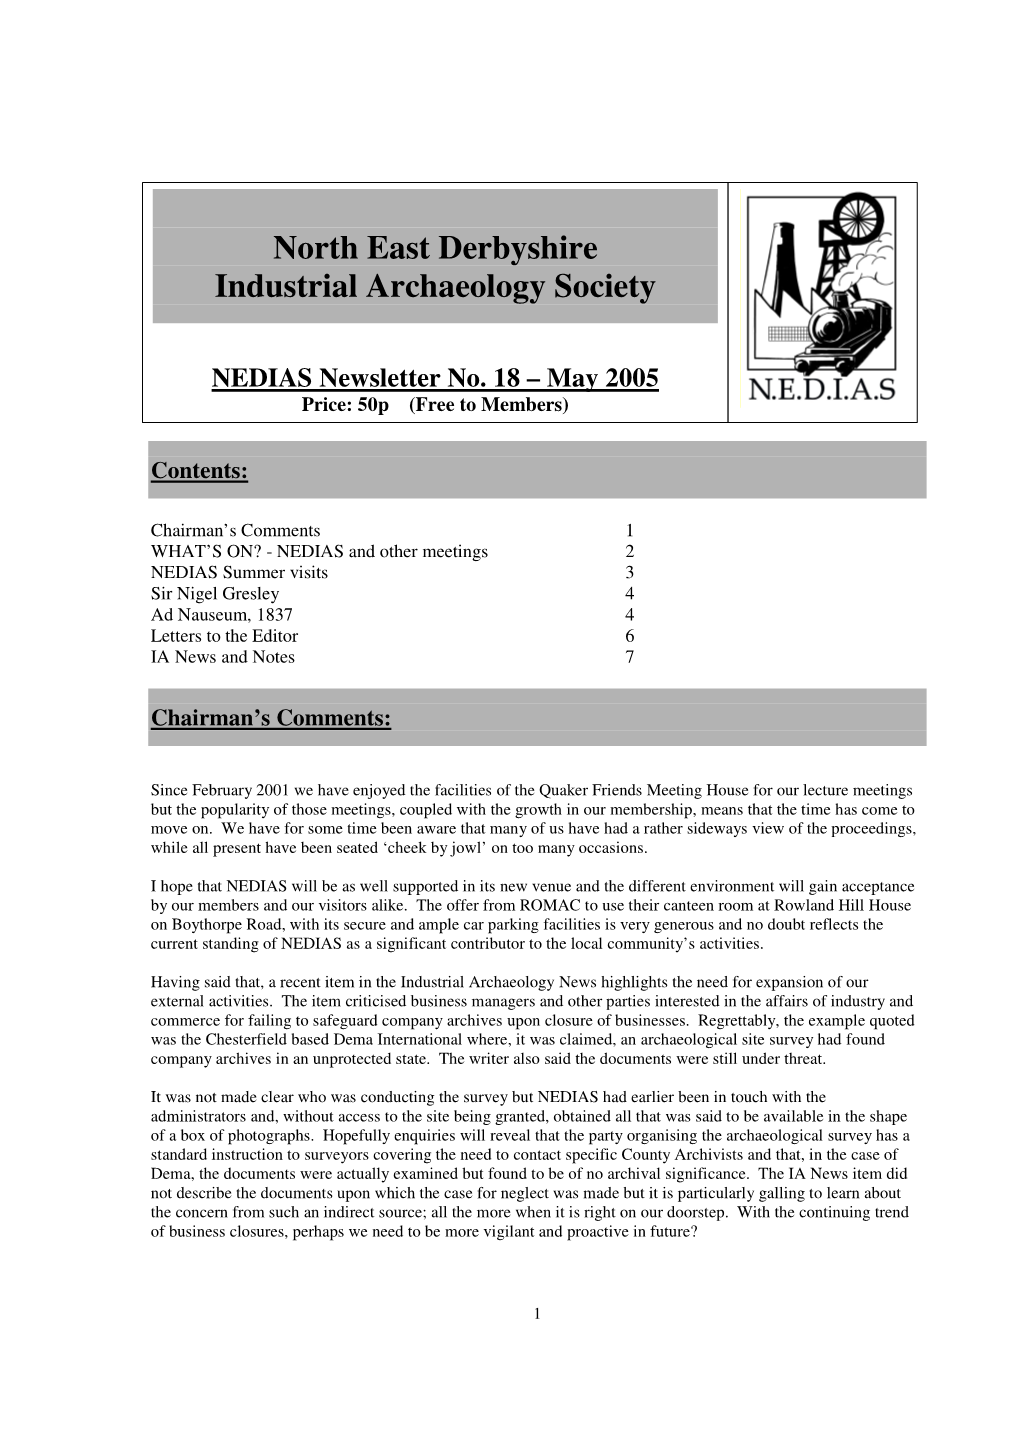 North East Derbyshire Industrial Archaeology Society